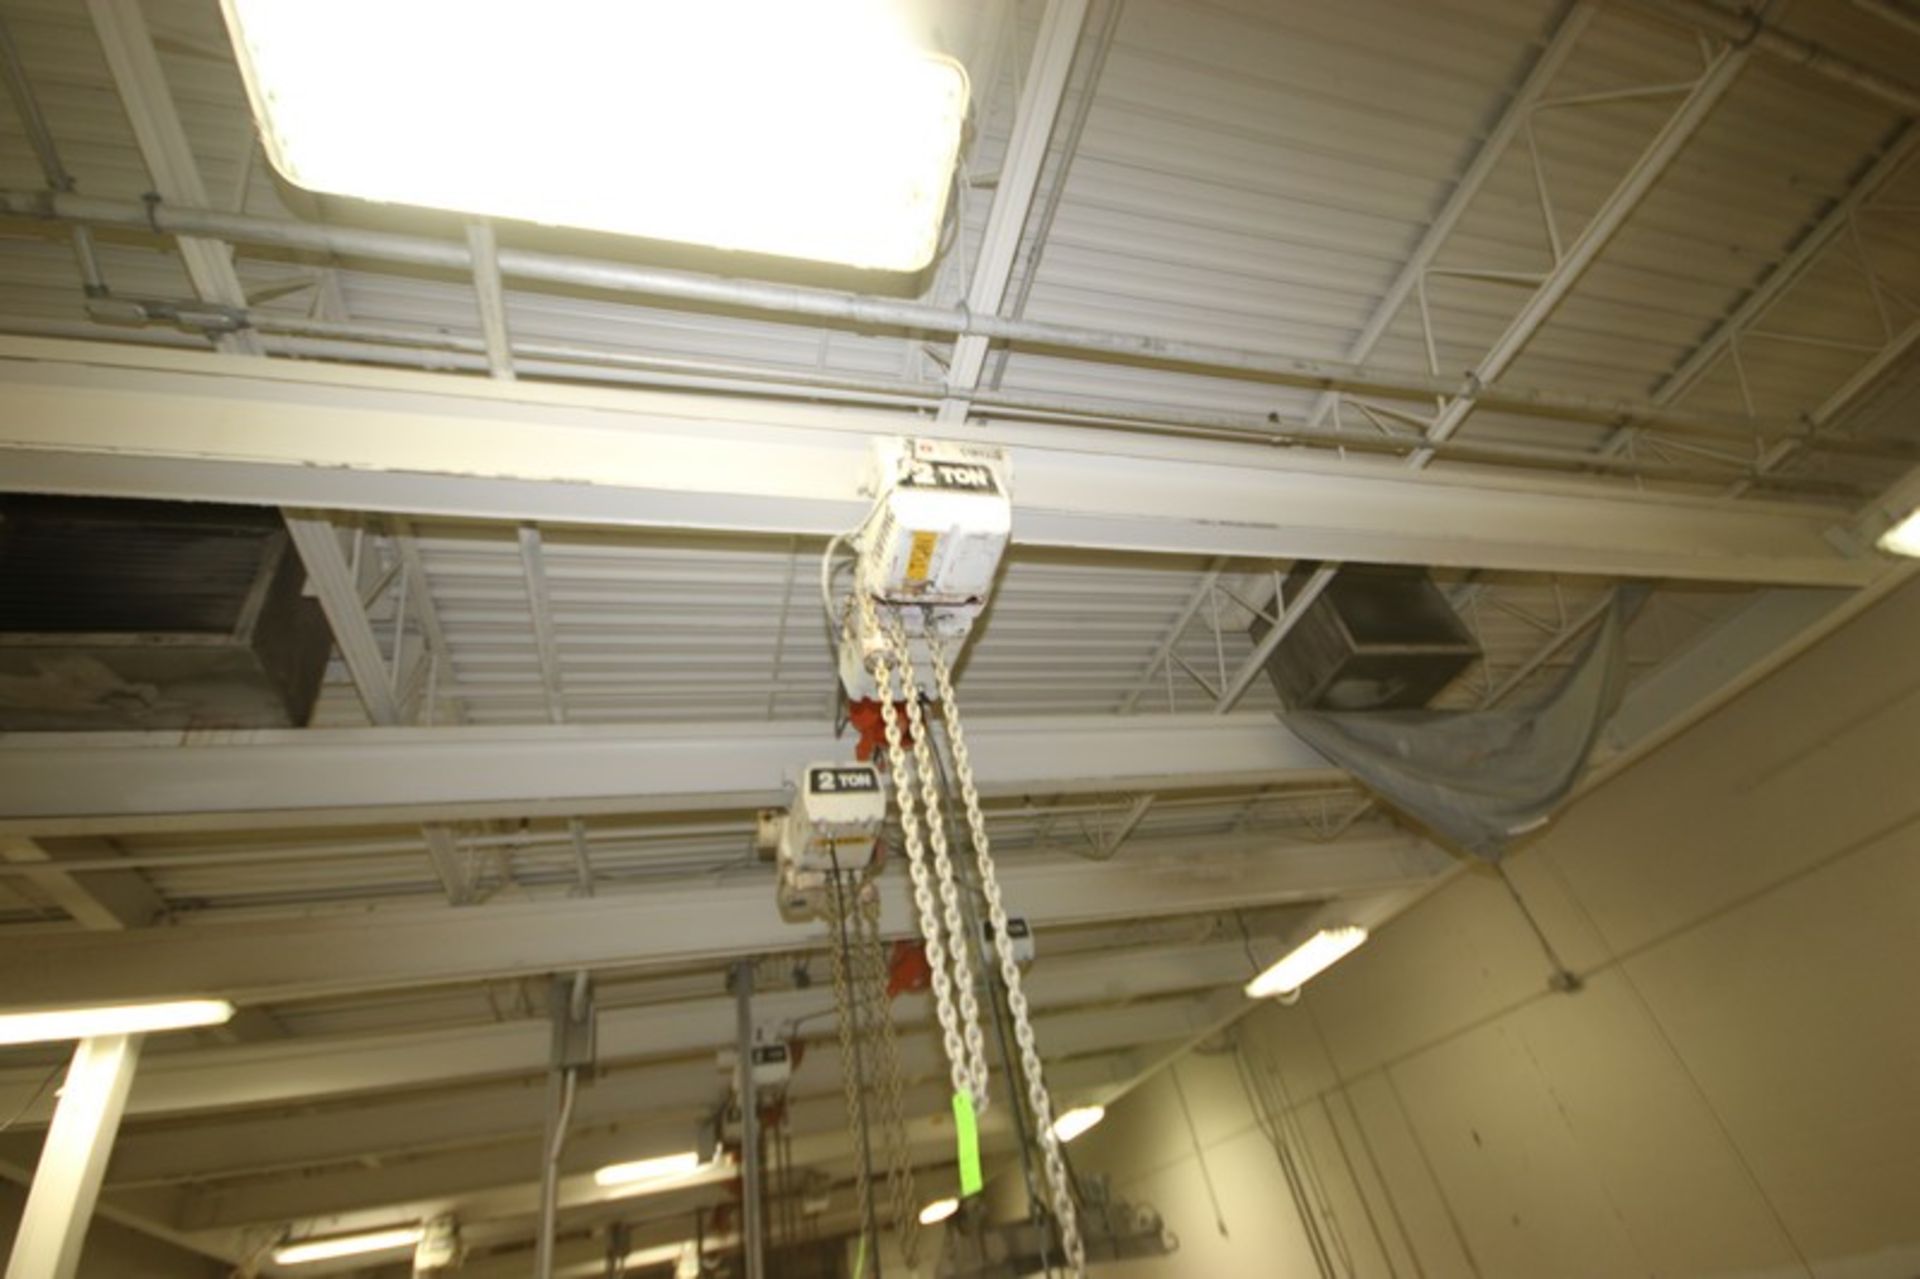 Coffing 2-Ton Electric Hoist, with Hand Control & Coffing Cord Reel (NOTE: Does Not Include Cross